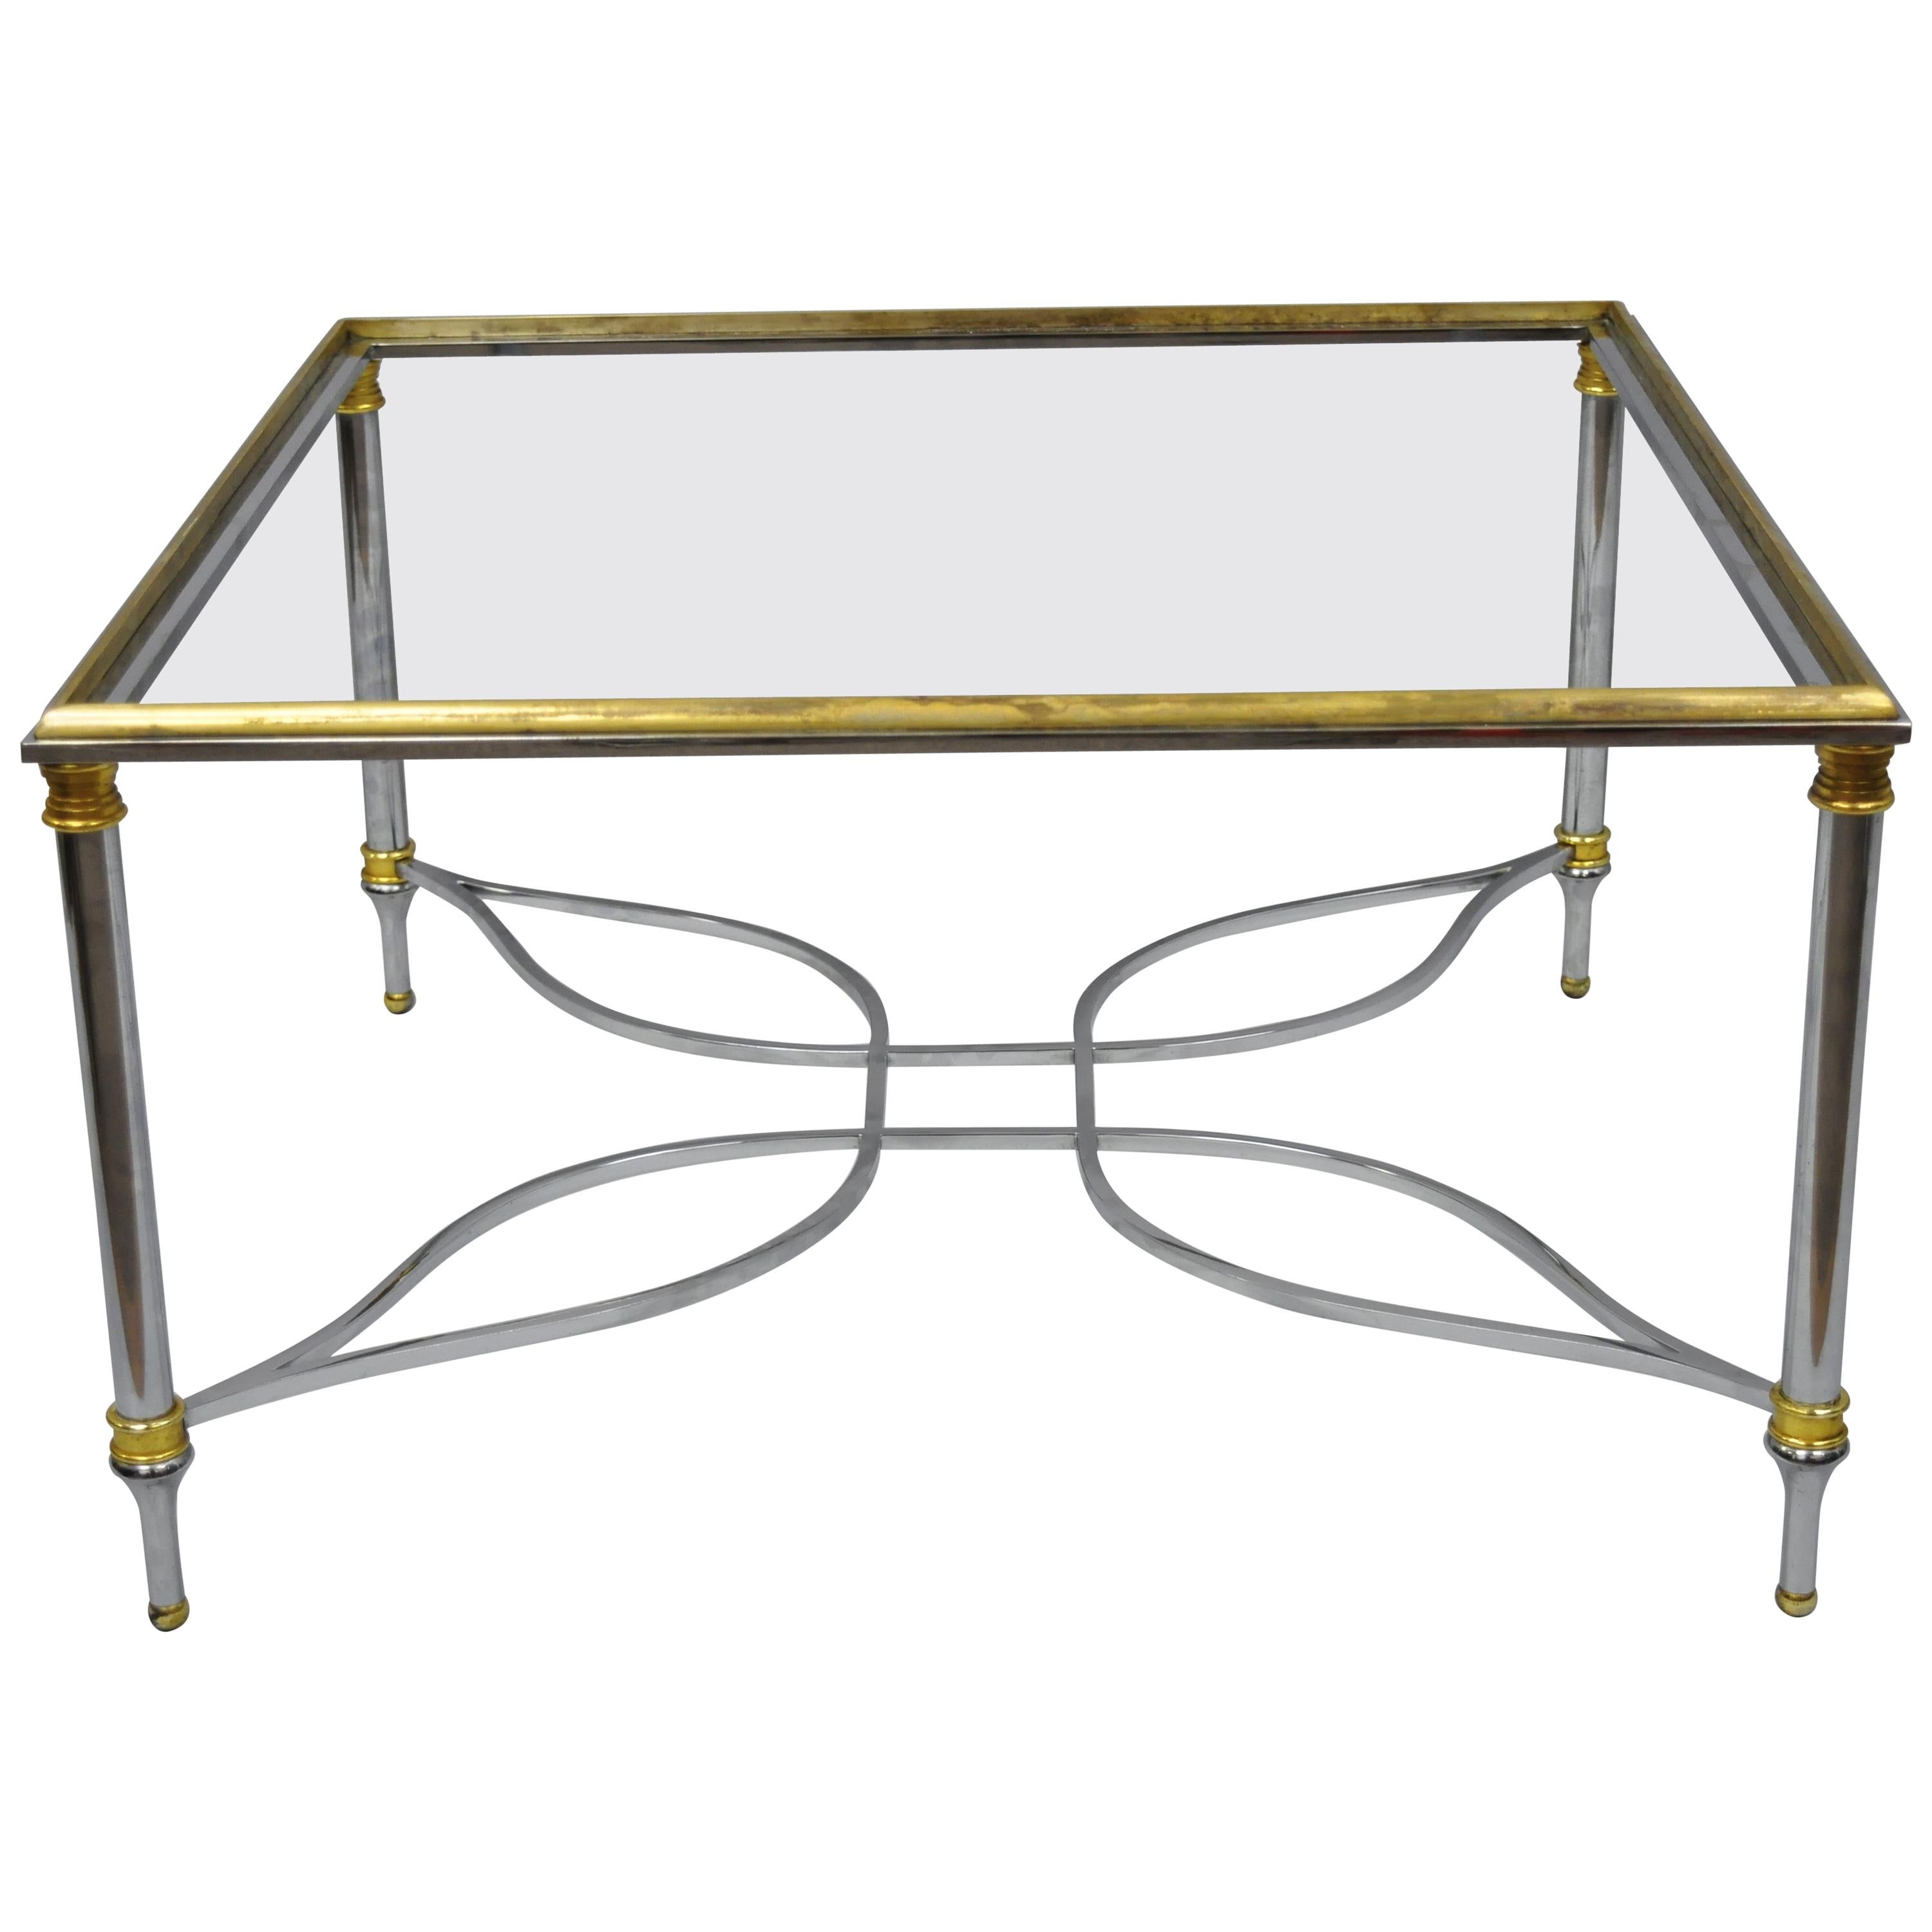 Maison Jansen Style Chrome Steel and Brass Square Coffee Table Base For Sale